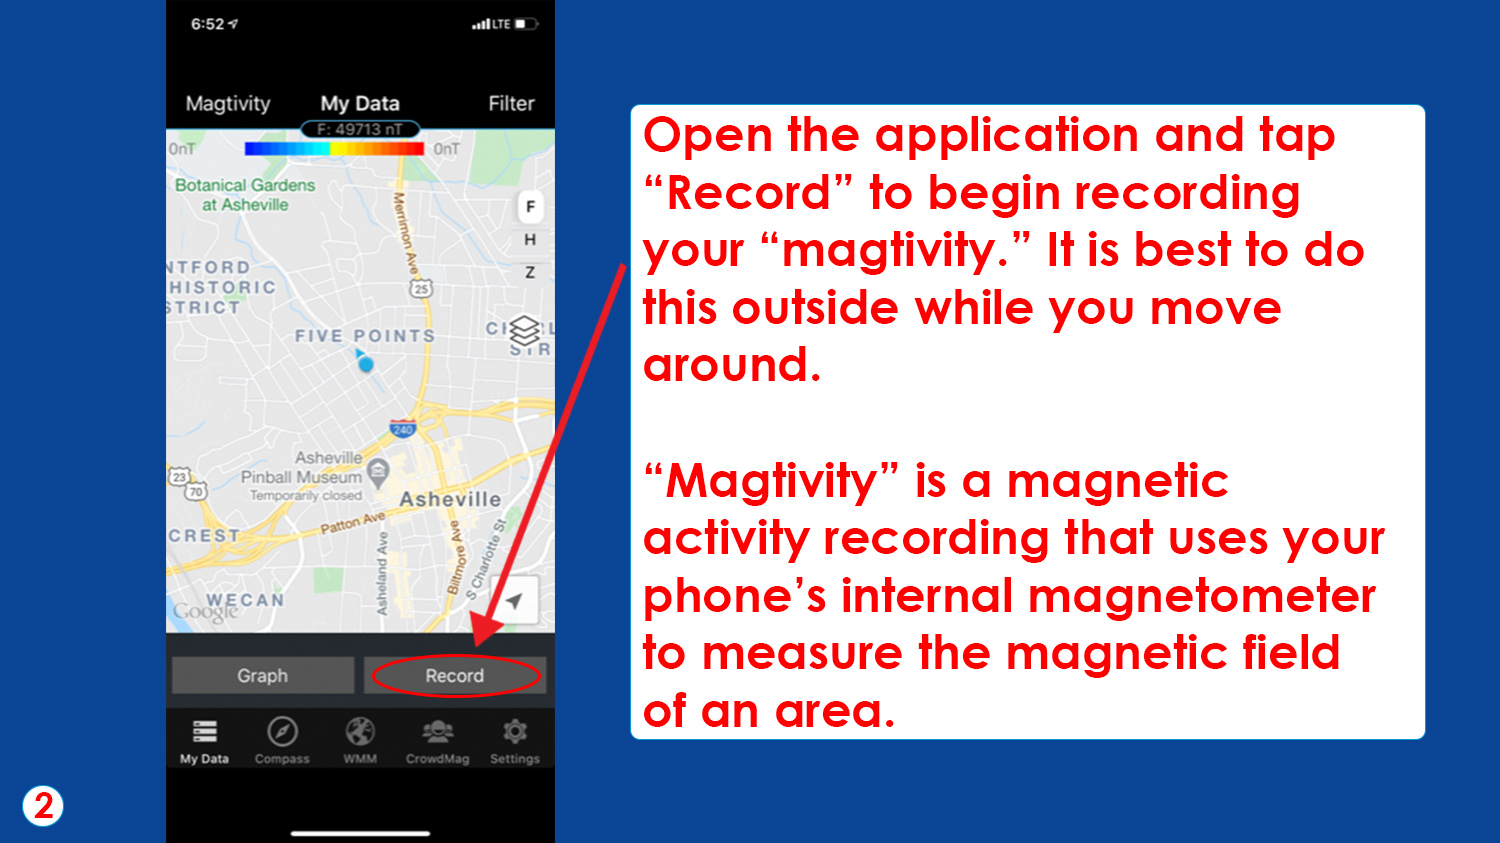 Open the application and tap “Record” to begin recording your “magtivity.” It is best to do this outside while you move around.

“Magtivity” is a magnetic activity recording that uses your phone’s internal magnetometer to measure the magnetic field of an area.